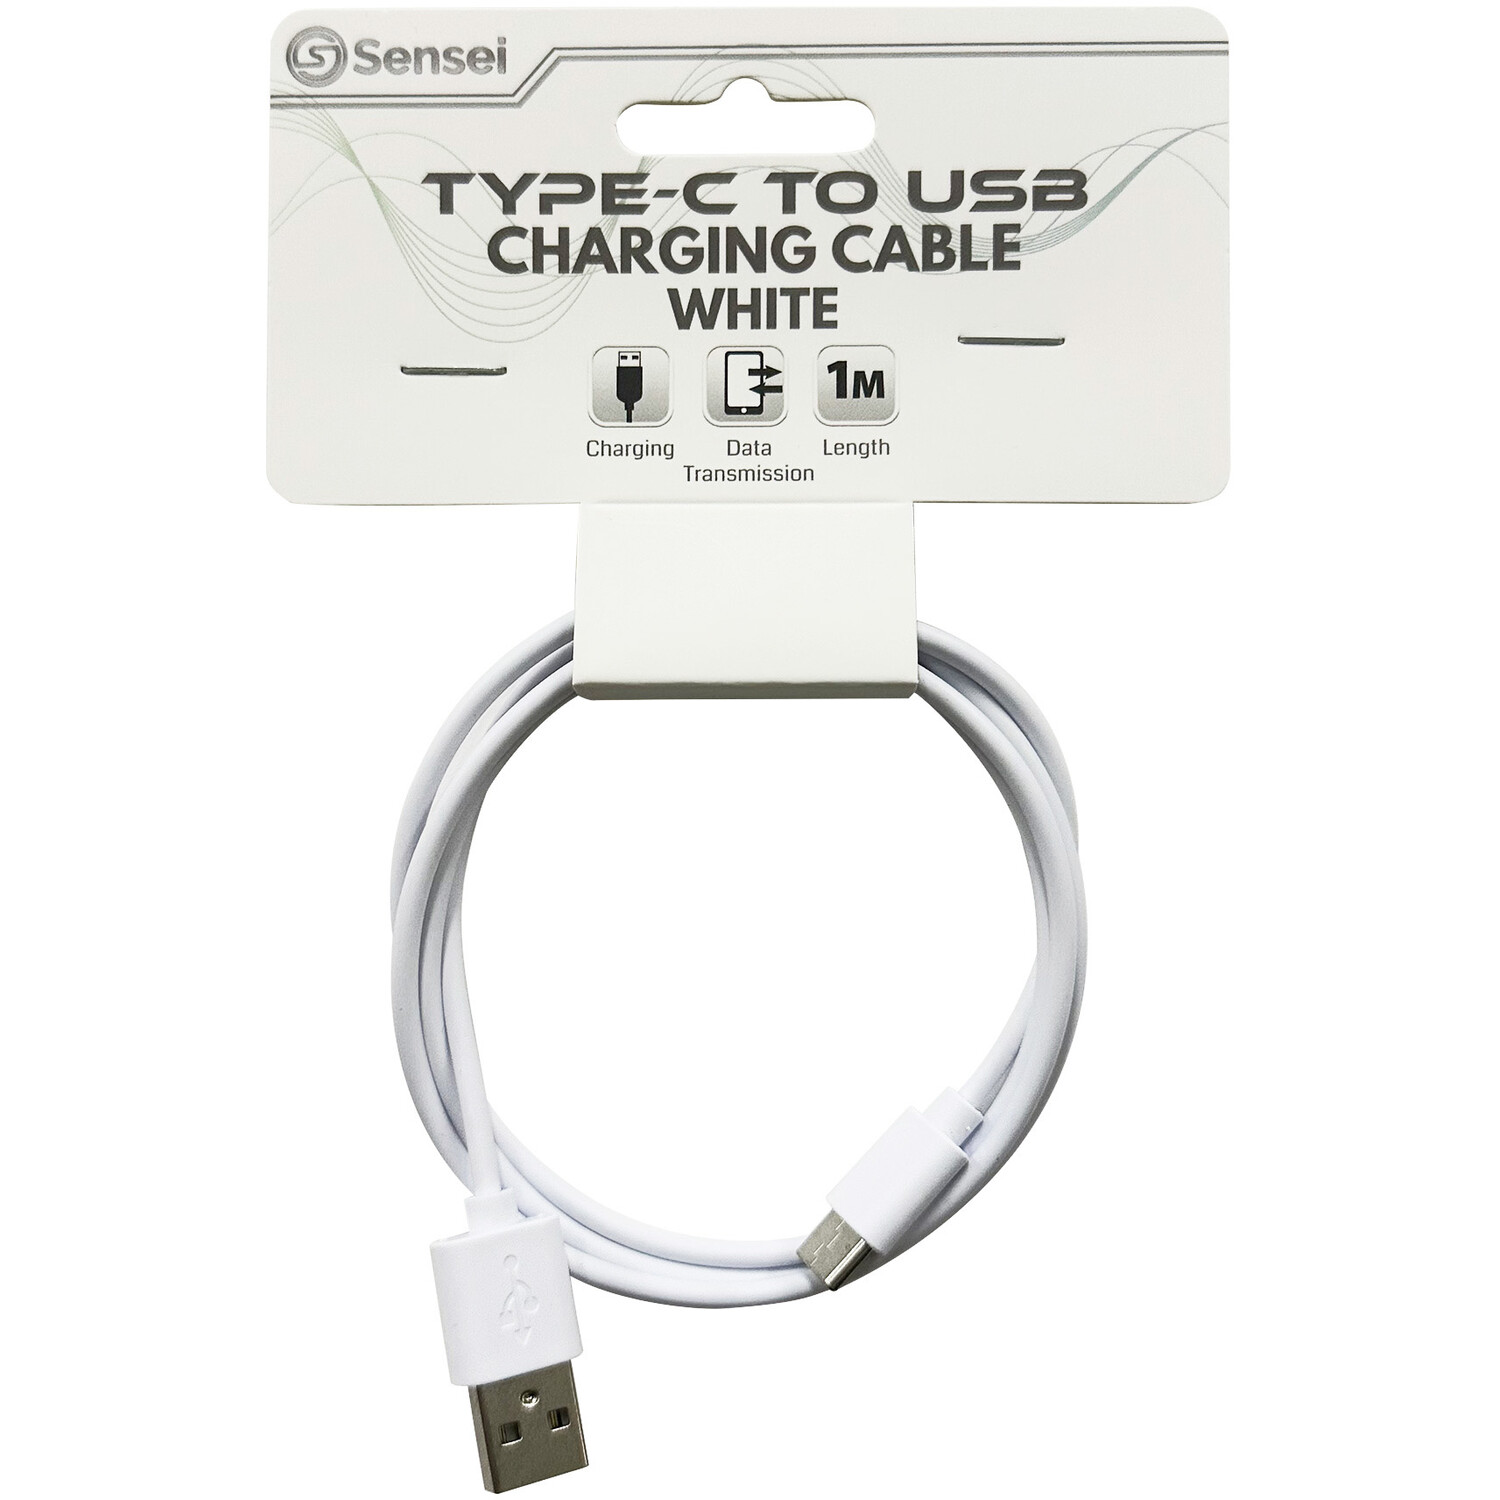 Type-C to USB Charging Cable Image